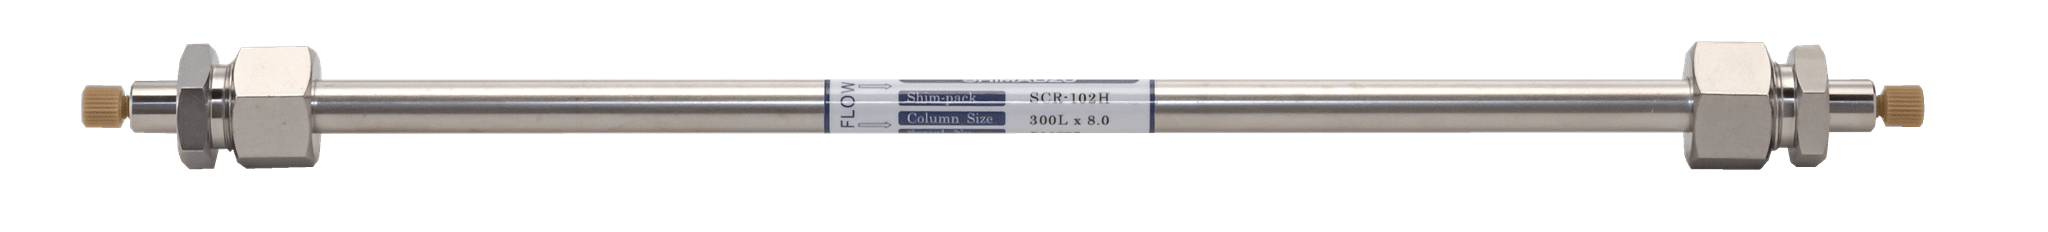 Picture of Shim-pack SCR-102H; 300 x 8.0